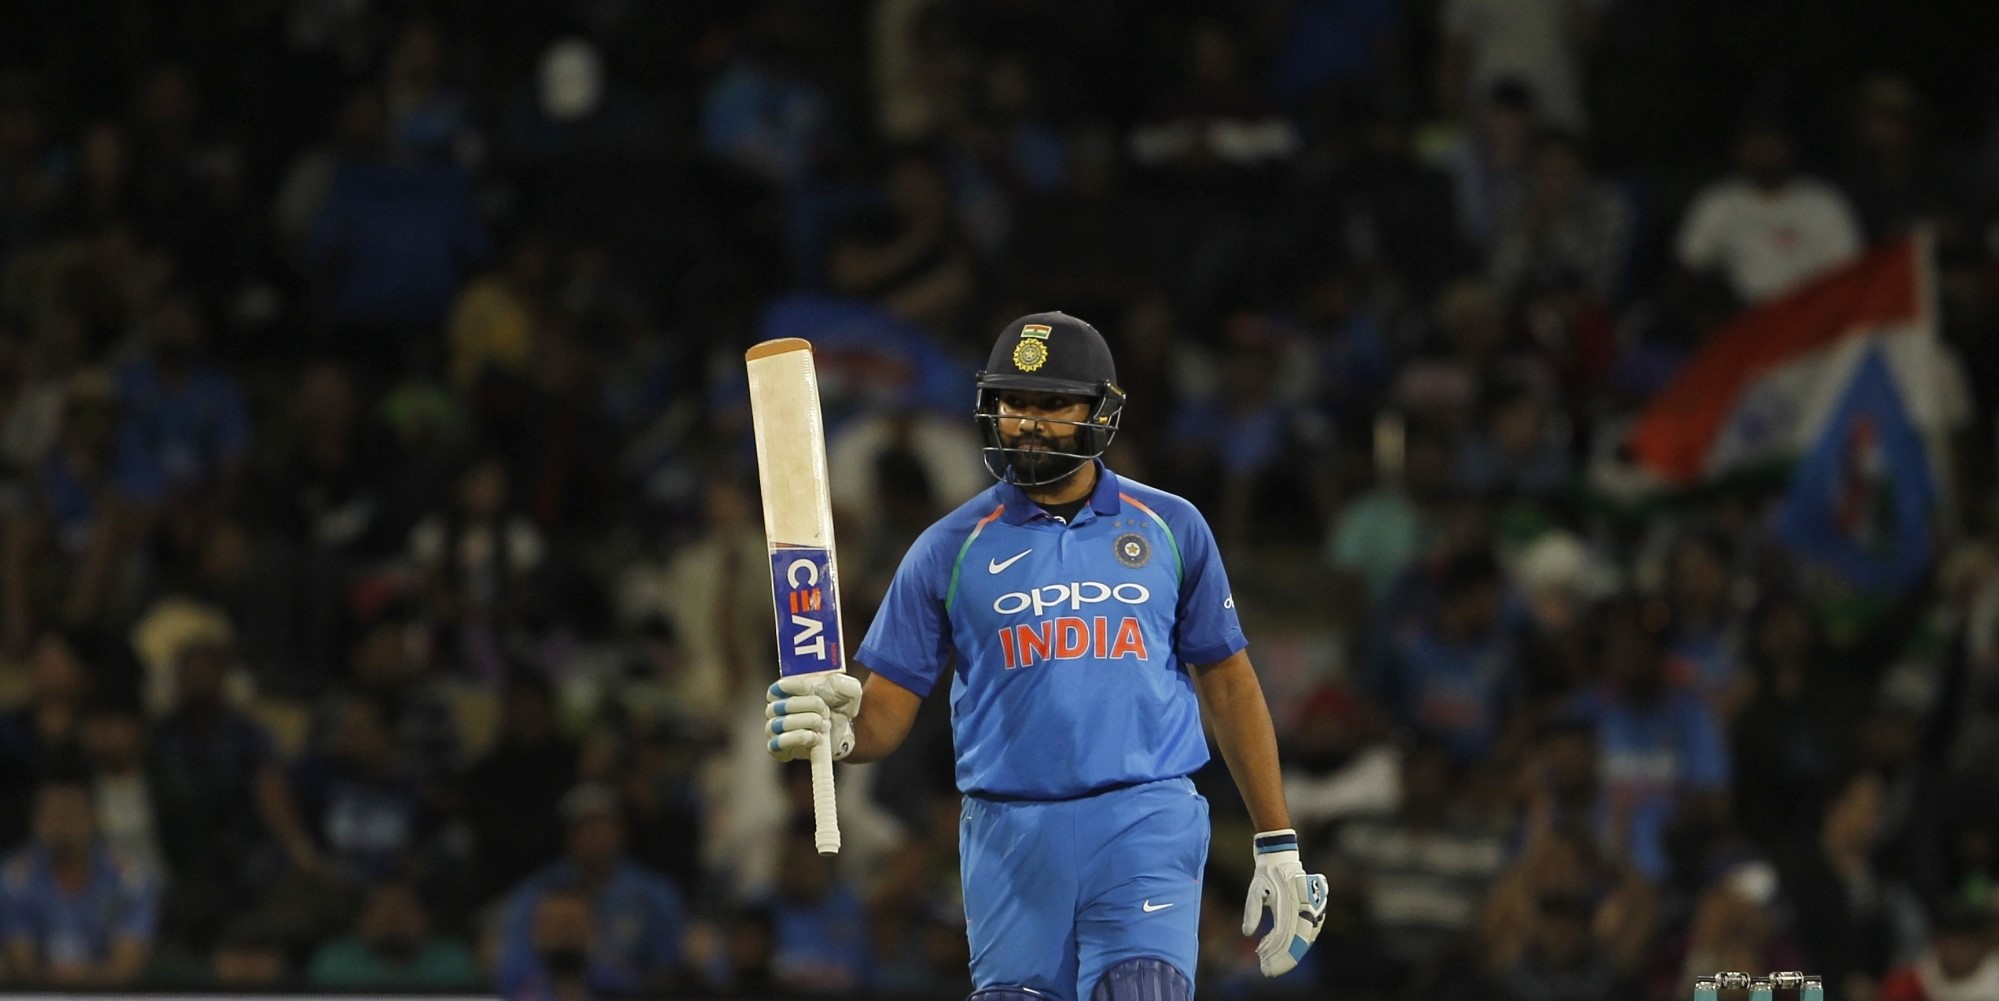 Innings against South Africa was one of my best, says Rohit Sharma